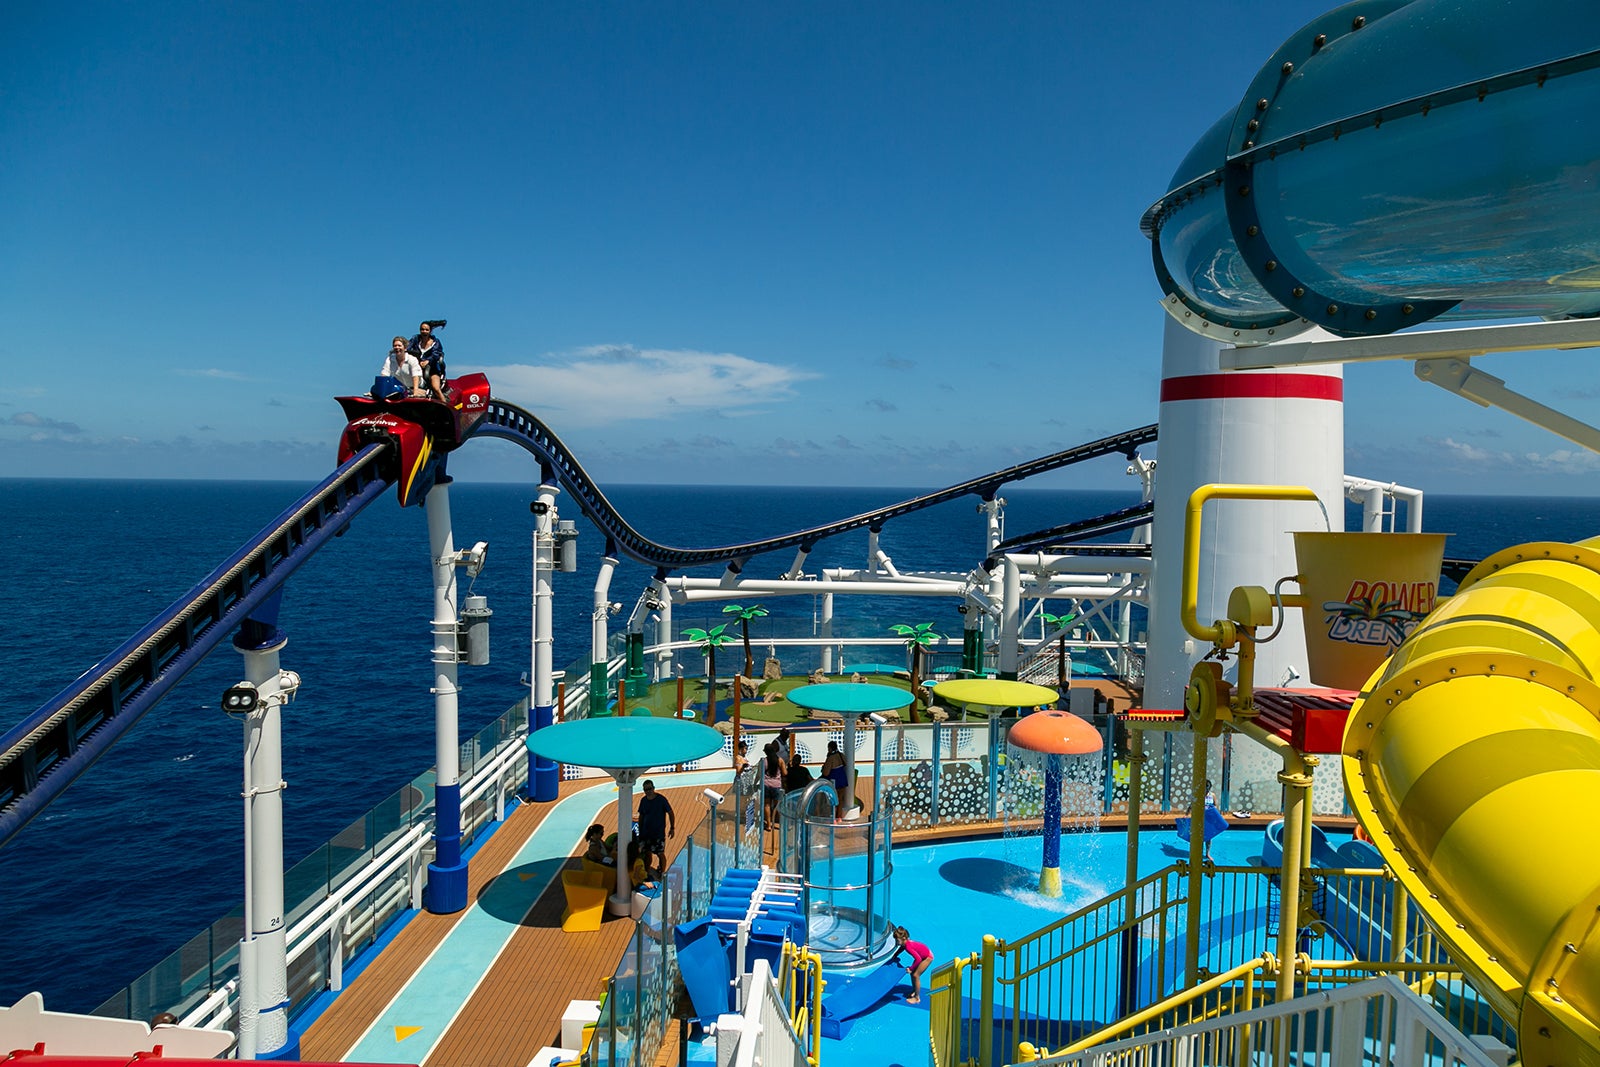 People riding Bolt rollercoaster above a water park on Mardi Gras cruise ship.